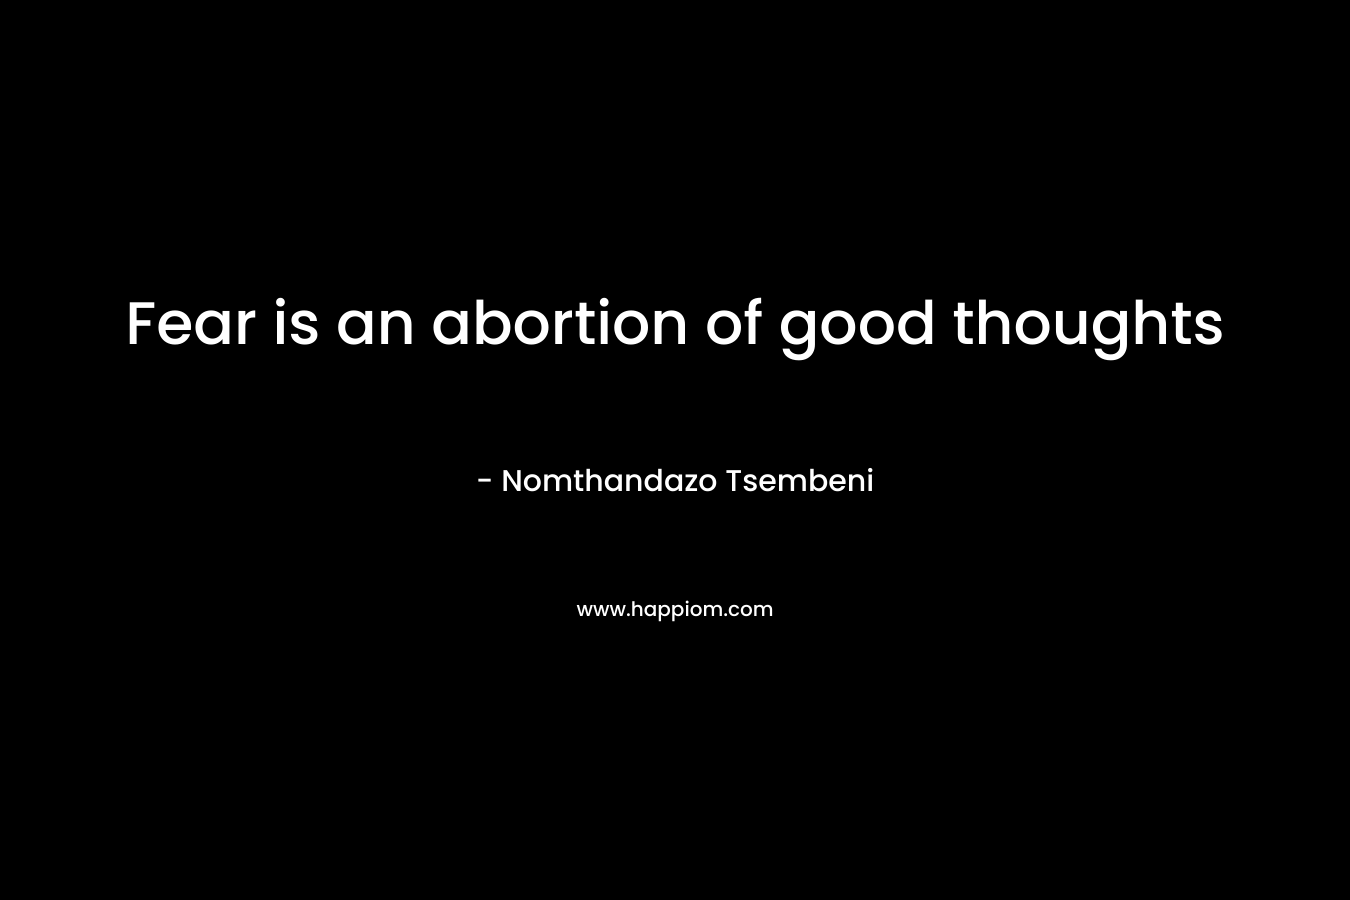 Fear is an abortion of good thoughts – Nomthandazo Tsembeni